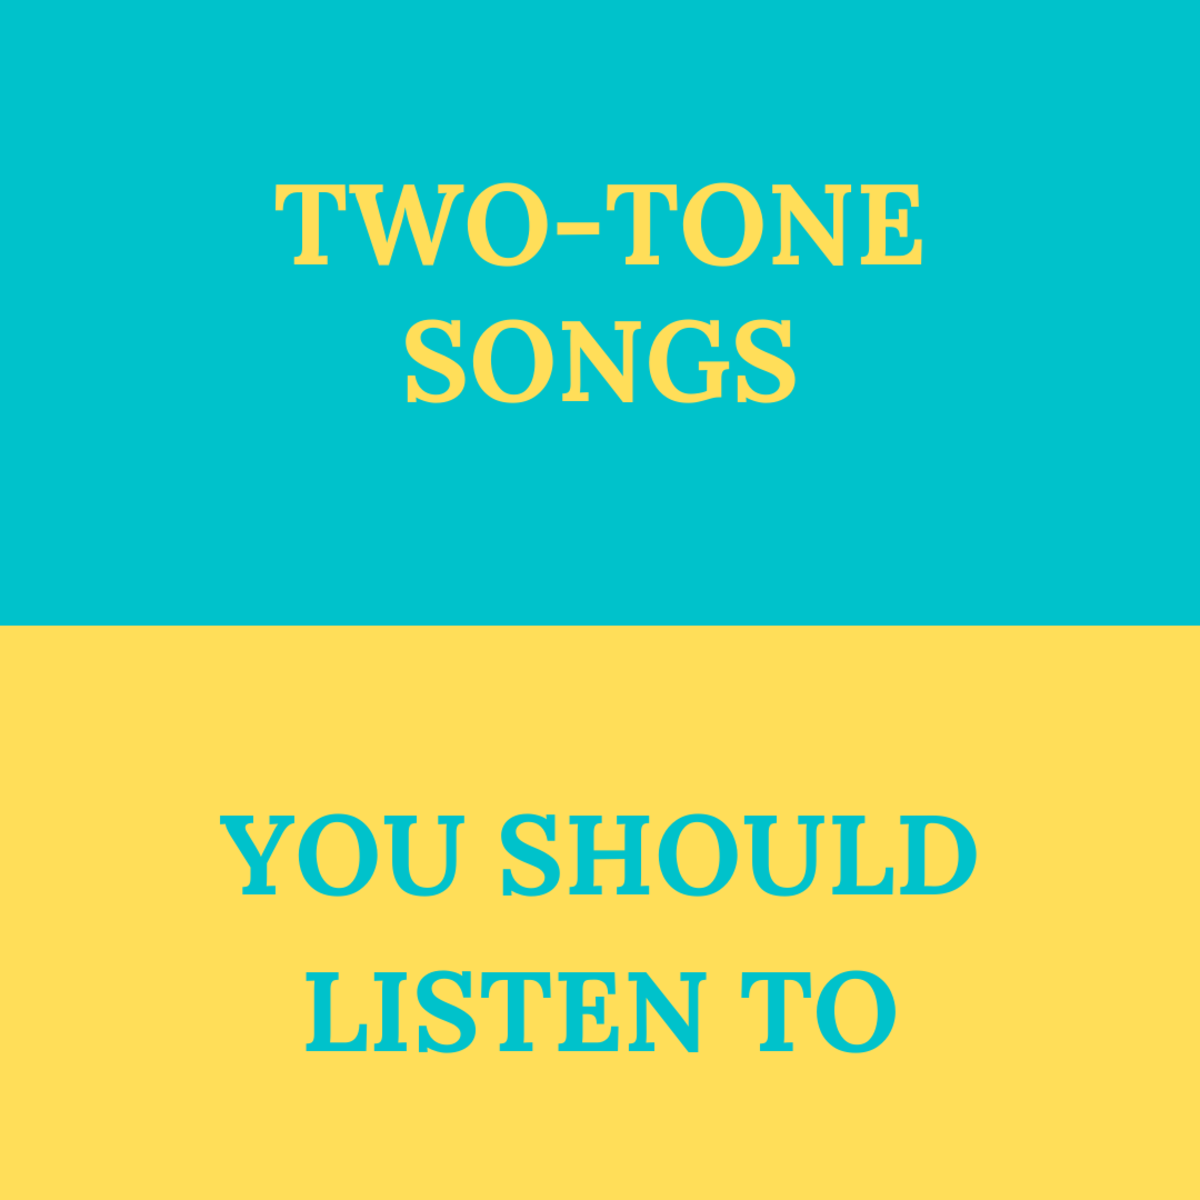 Top 10 Two-Tone Songs